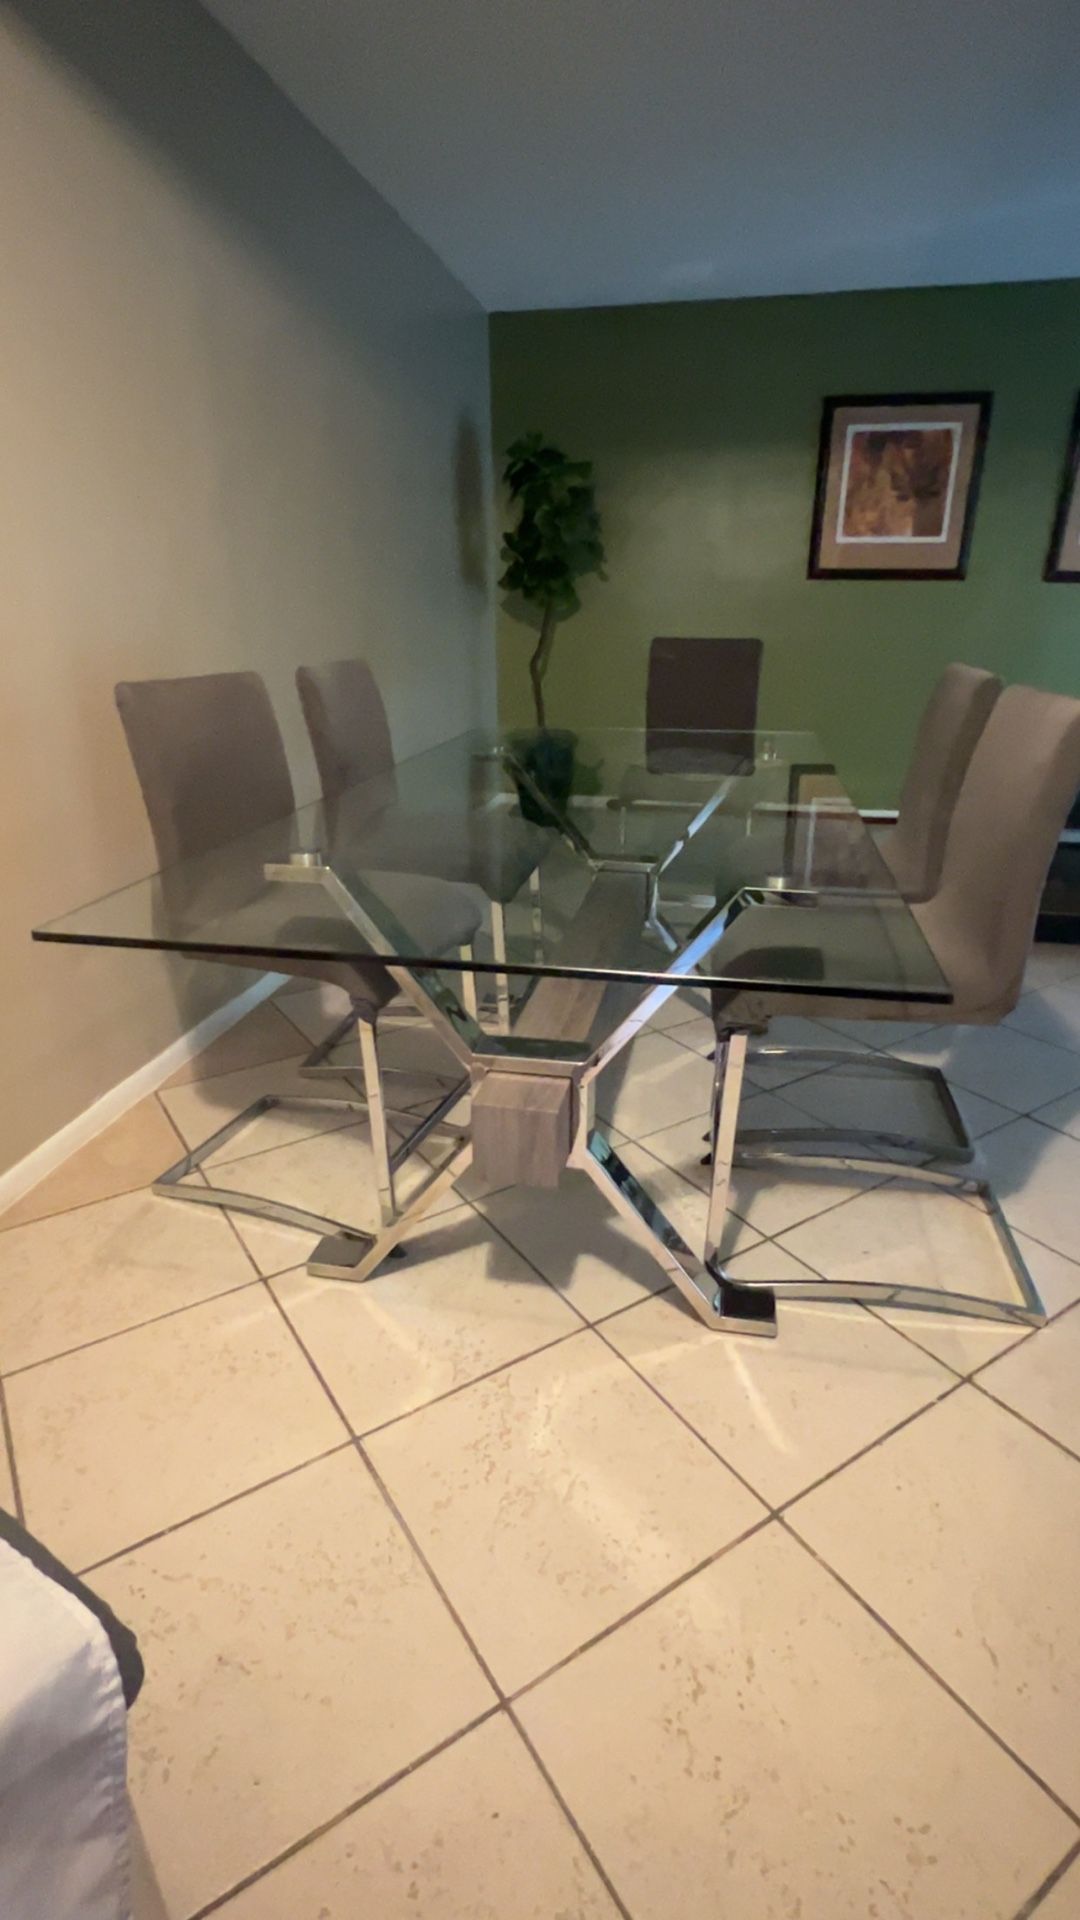 Dining Table W/ Chairs